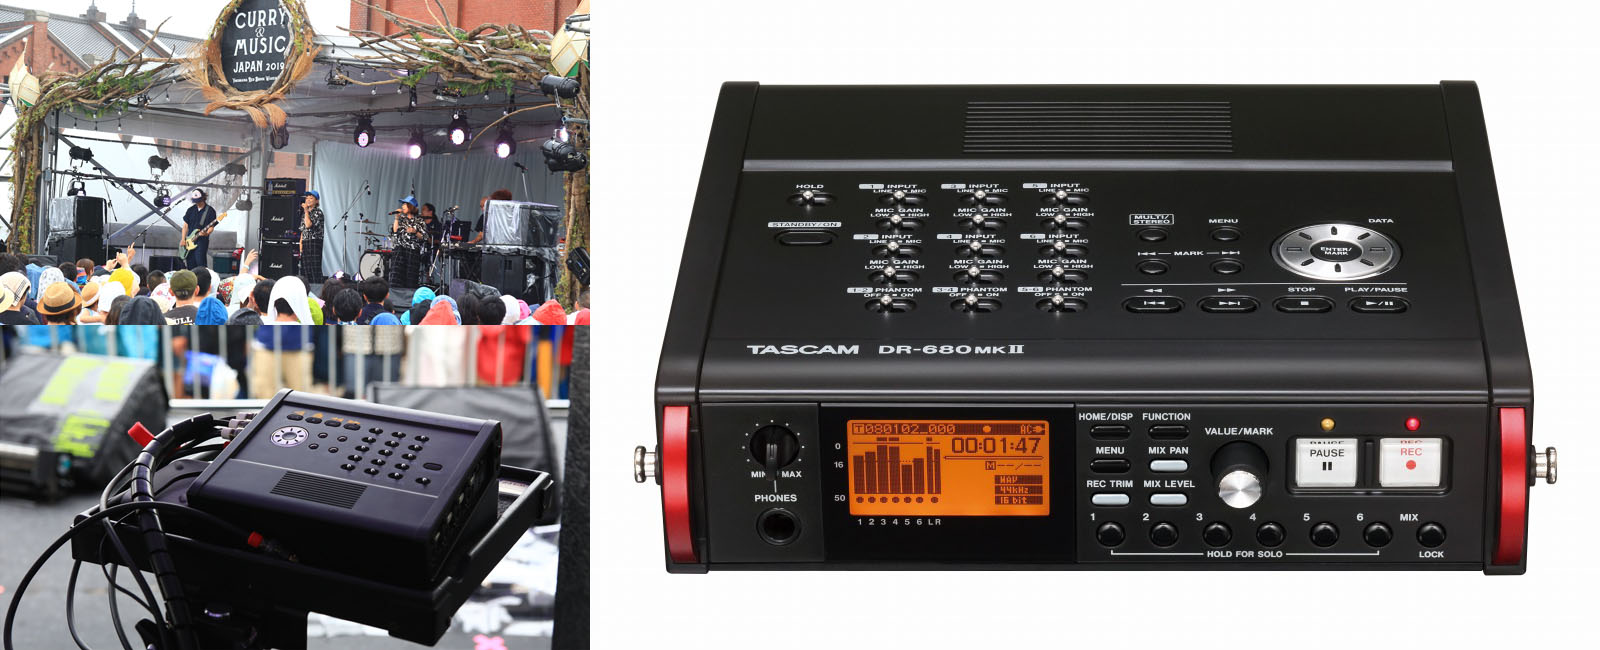 TASCAM DR-680MKII field recorder used for click/backing track playback